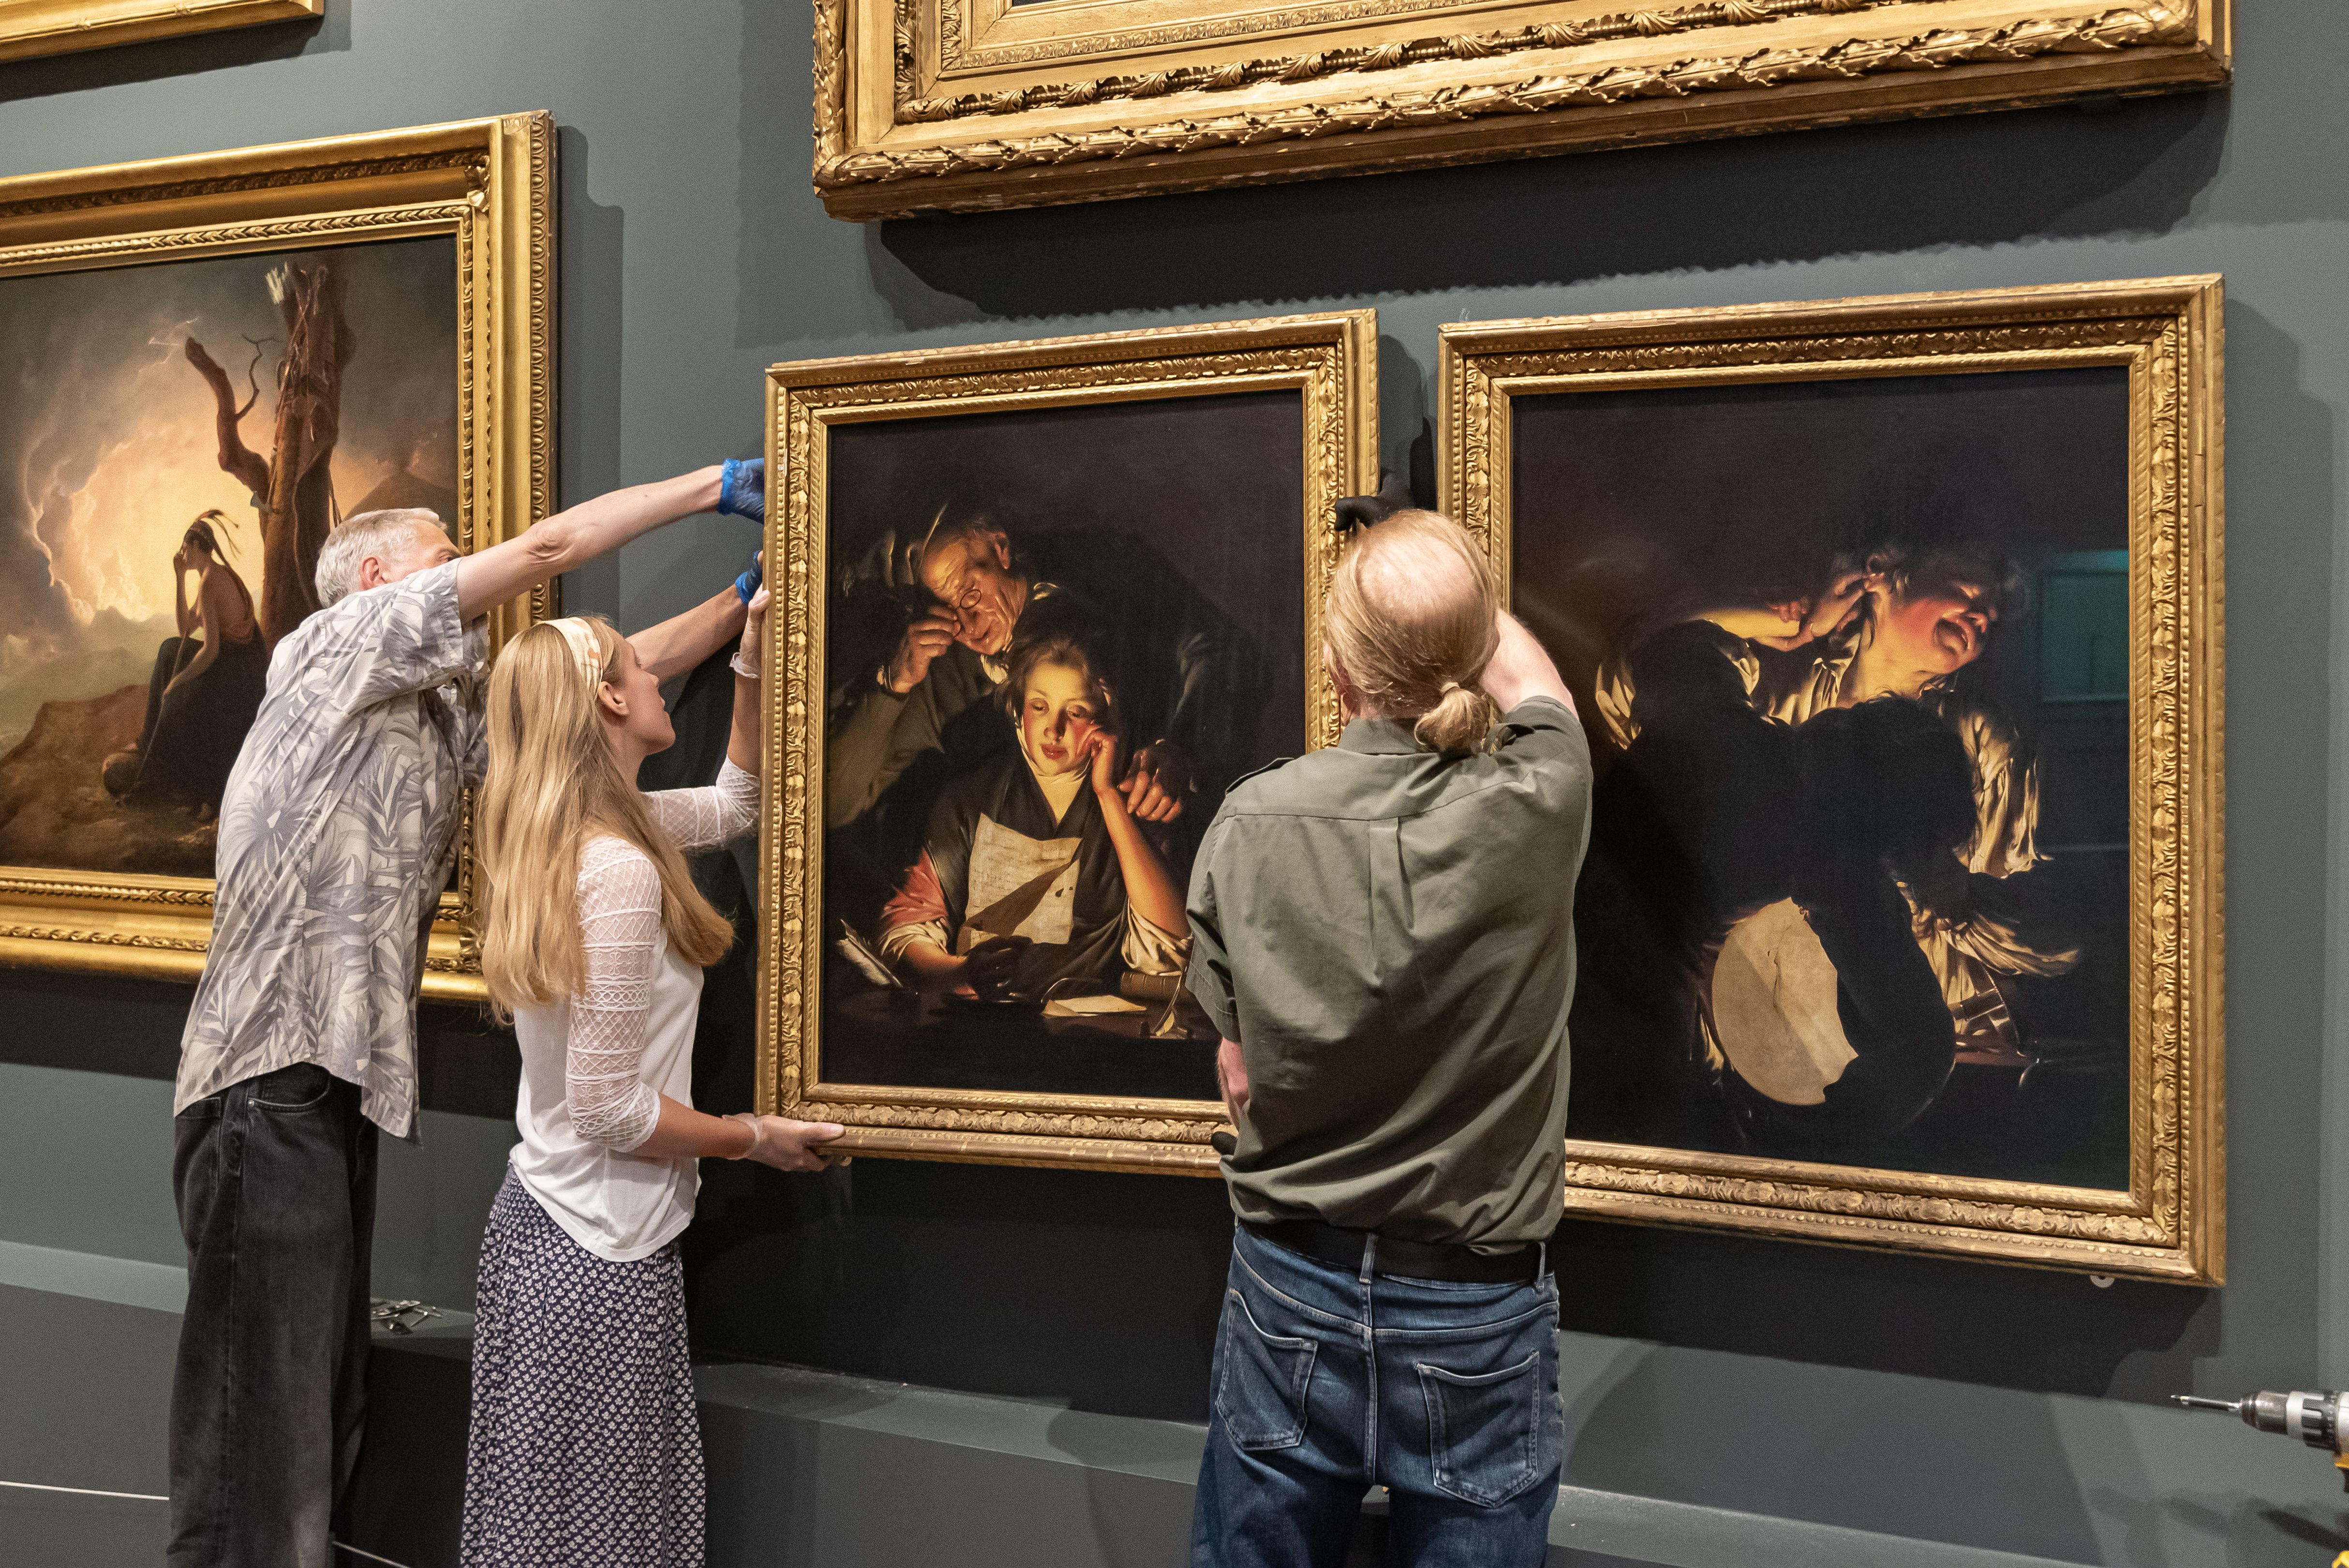 The paintings were carefully installed on Monday (Oliver Taylor/Derby Museums/PA)